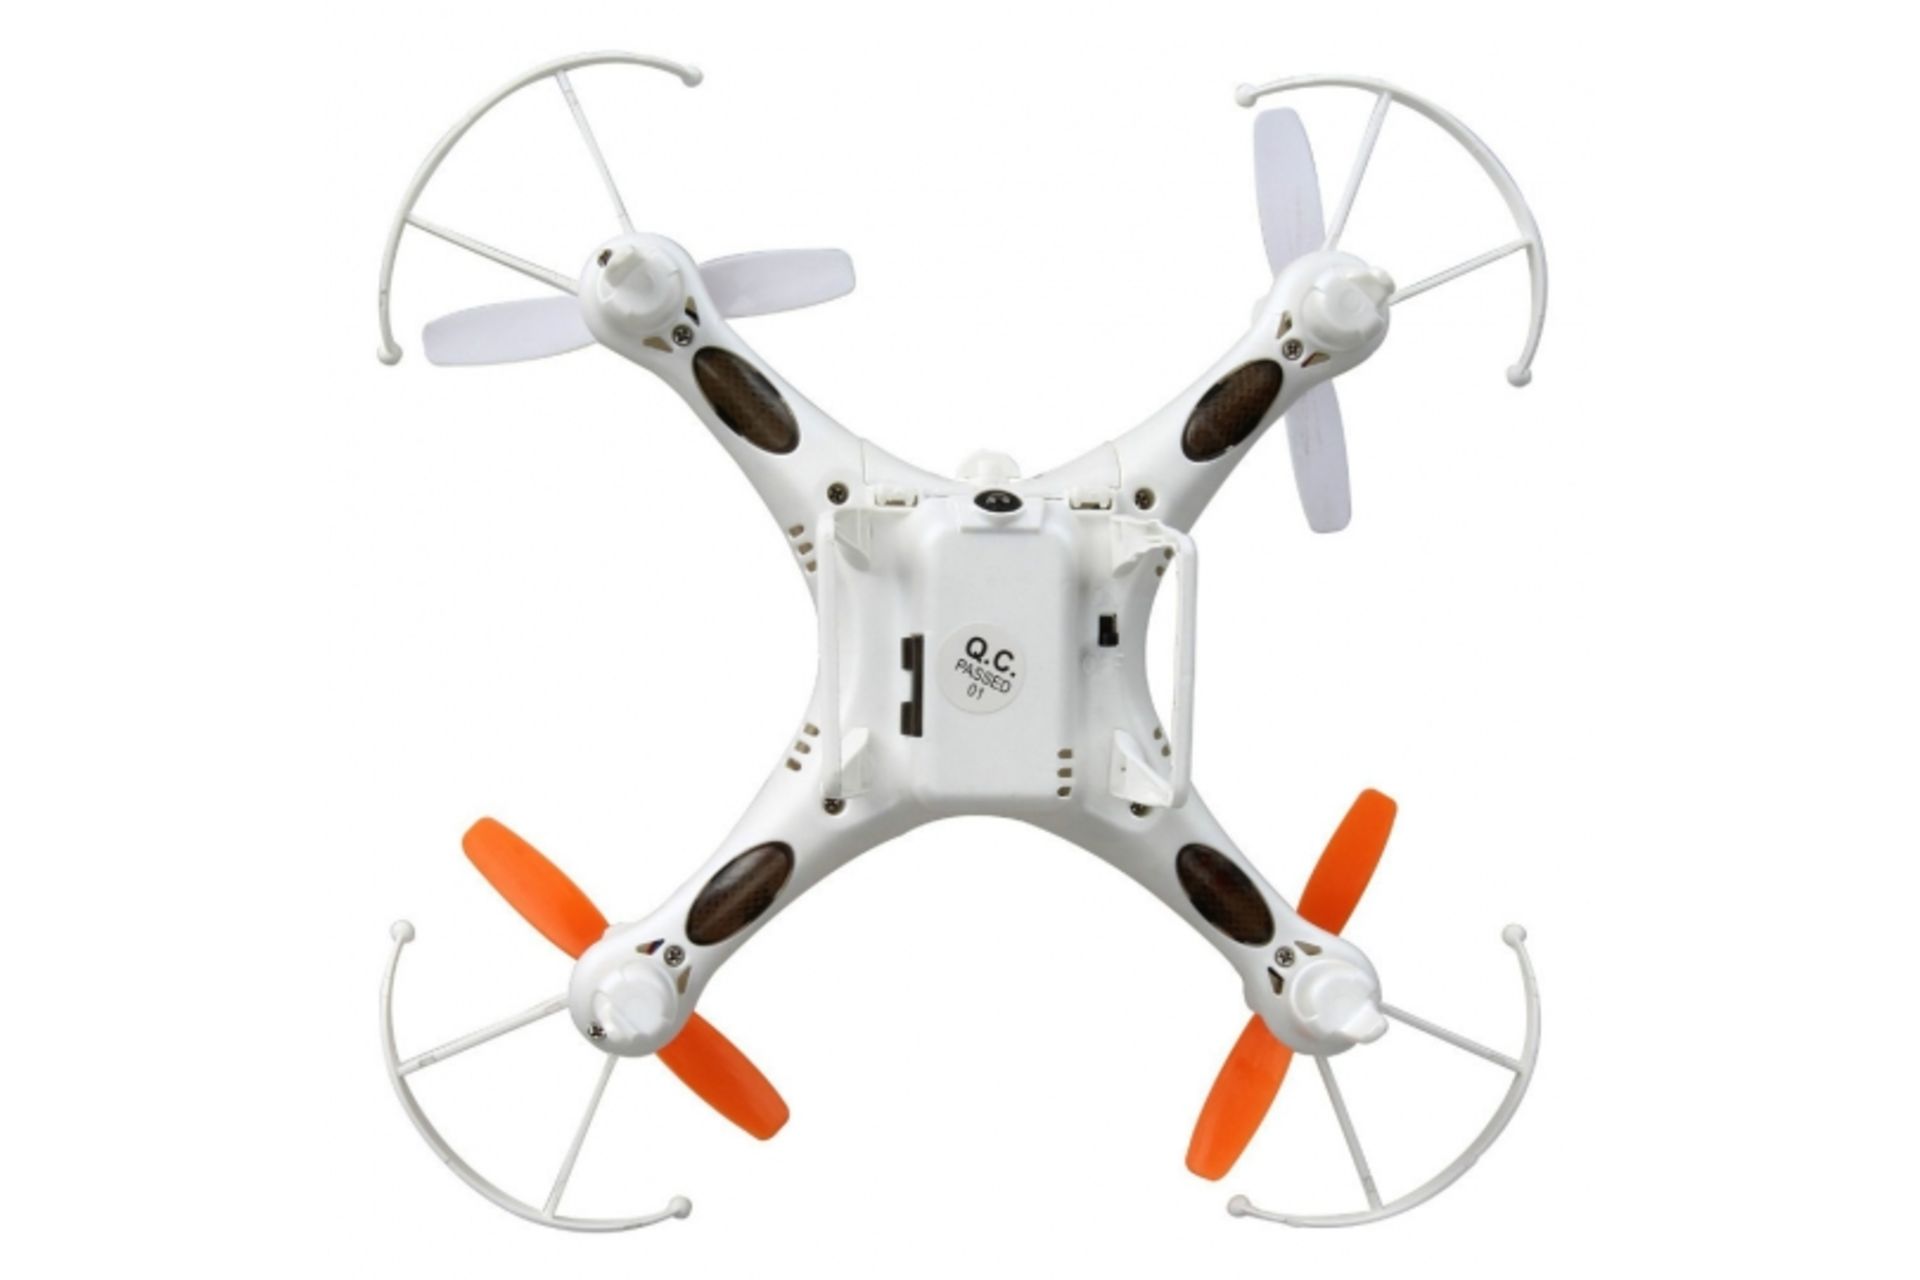 SKYTEC RC QUADCOPTER 4 CHANNEL 6 AXIS 2.4Ghz BNIB BRAND NEW IN BOX Control Helicopters, also refered - Image 14 of 14